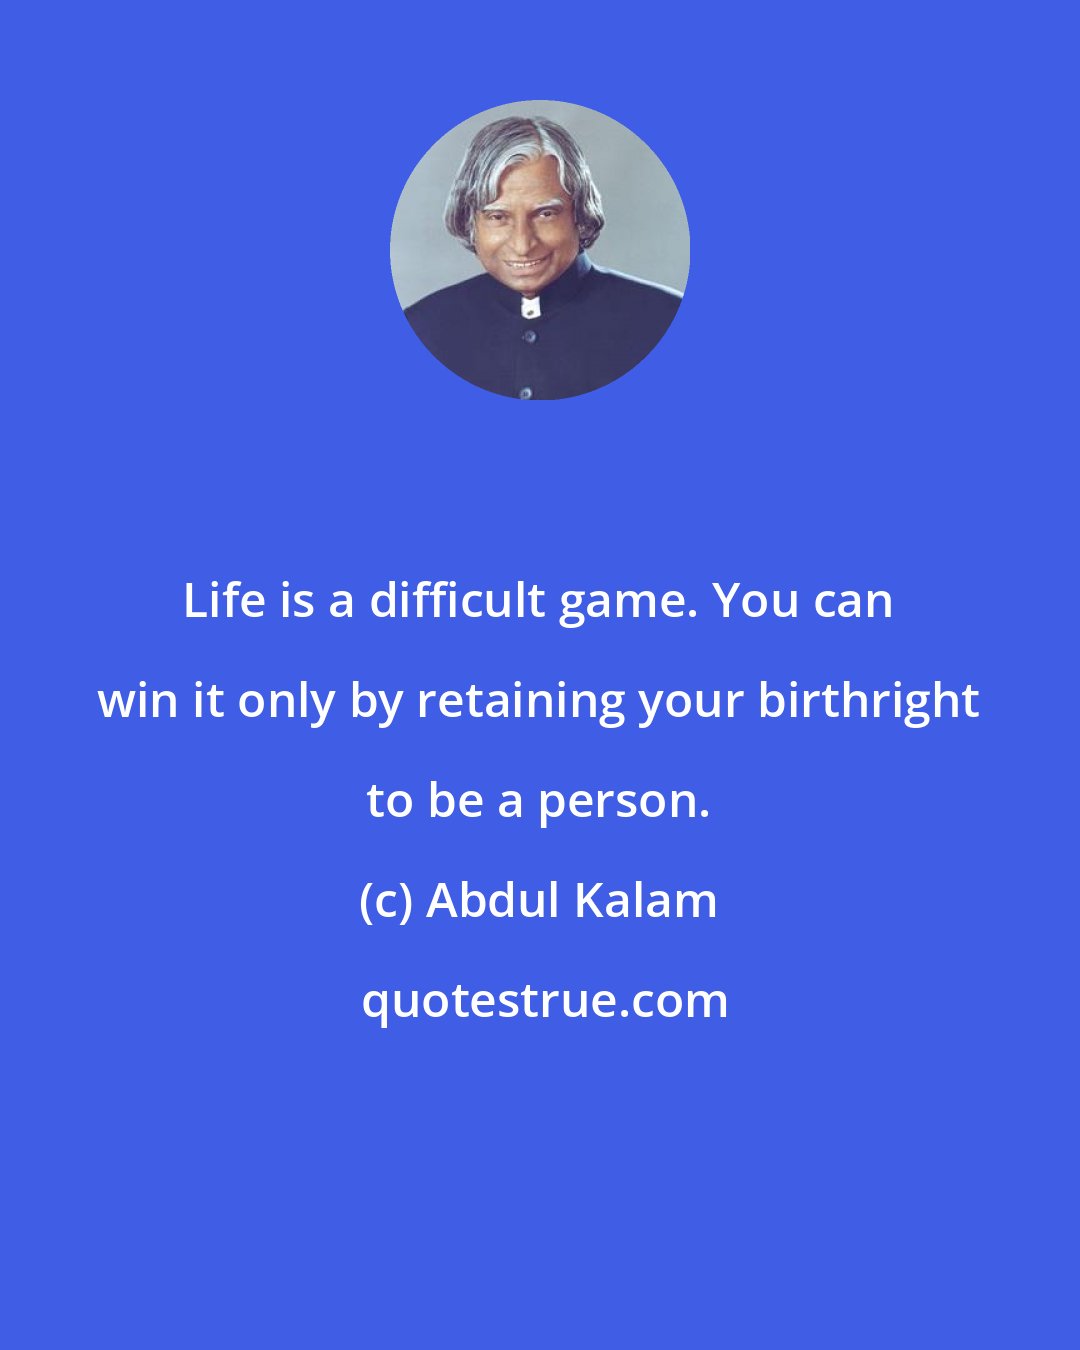 Abdul Kalam: Life is a difficult game. You can win it only by retaining your birthright to be a person.